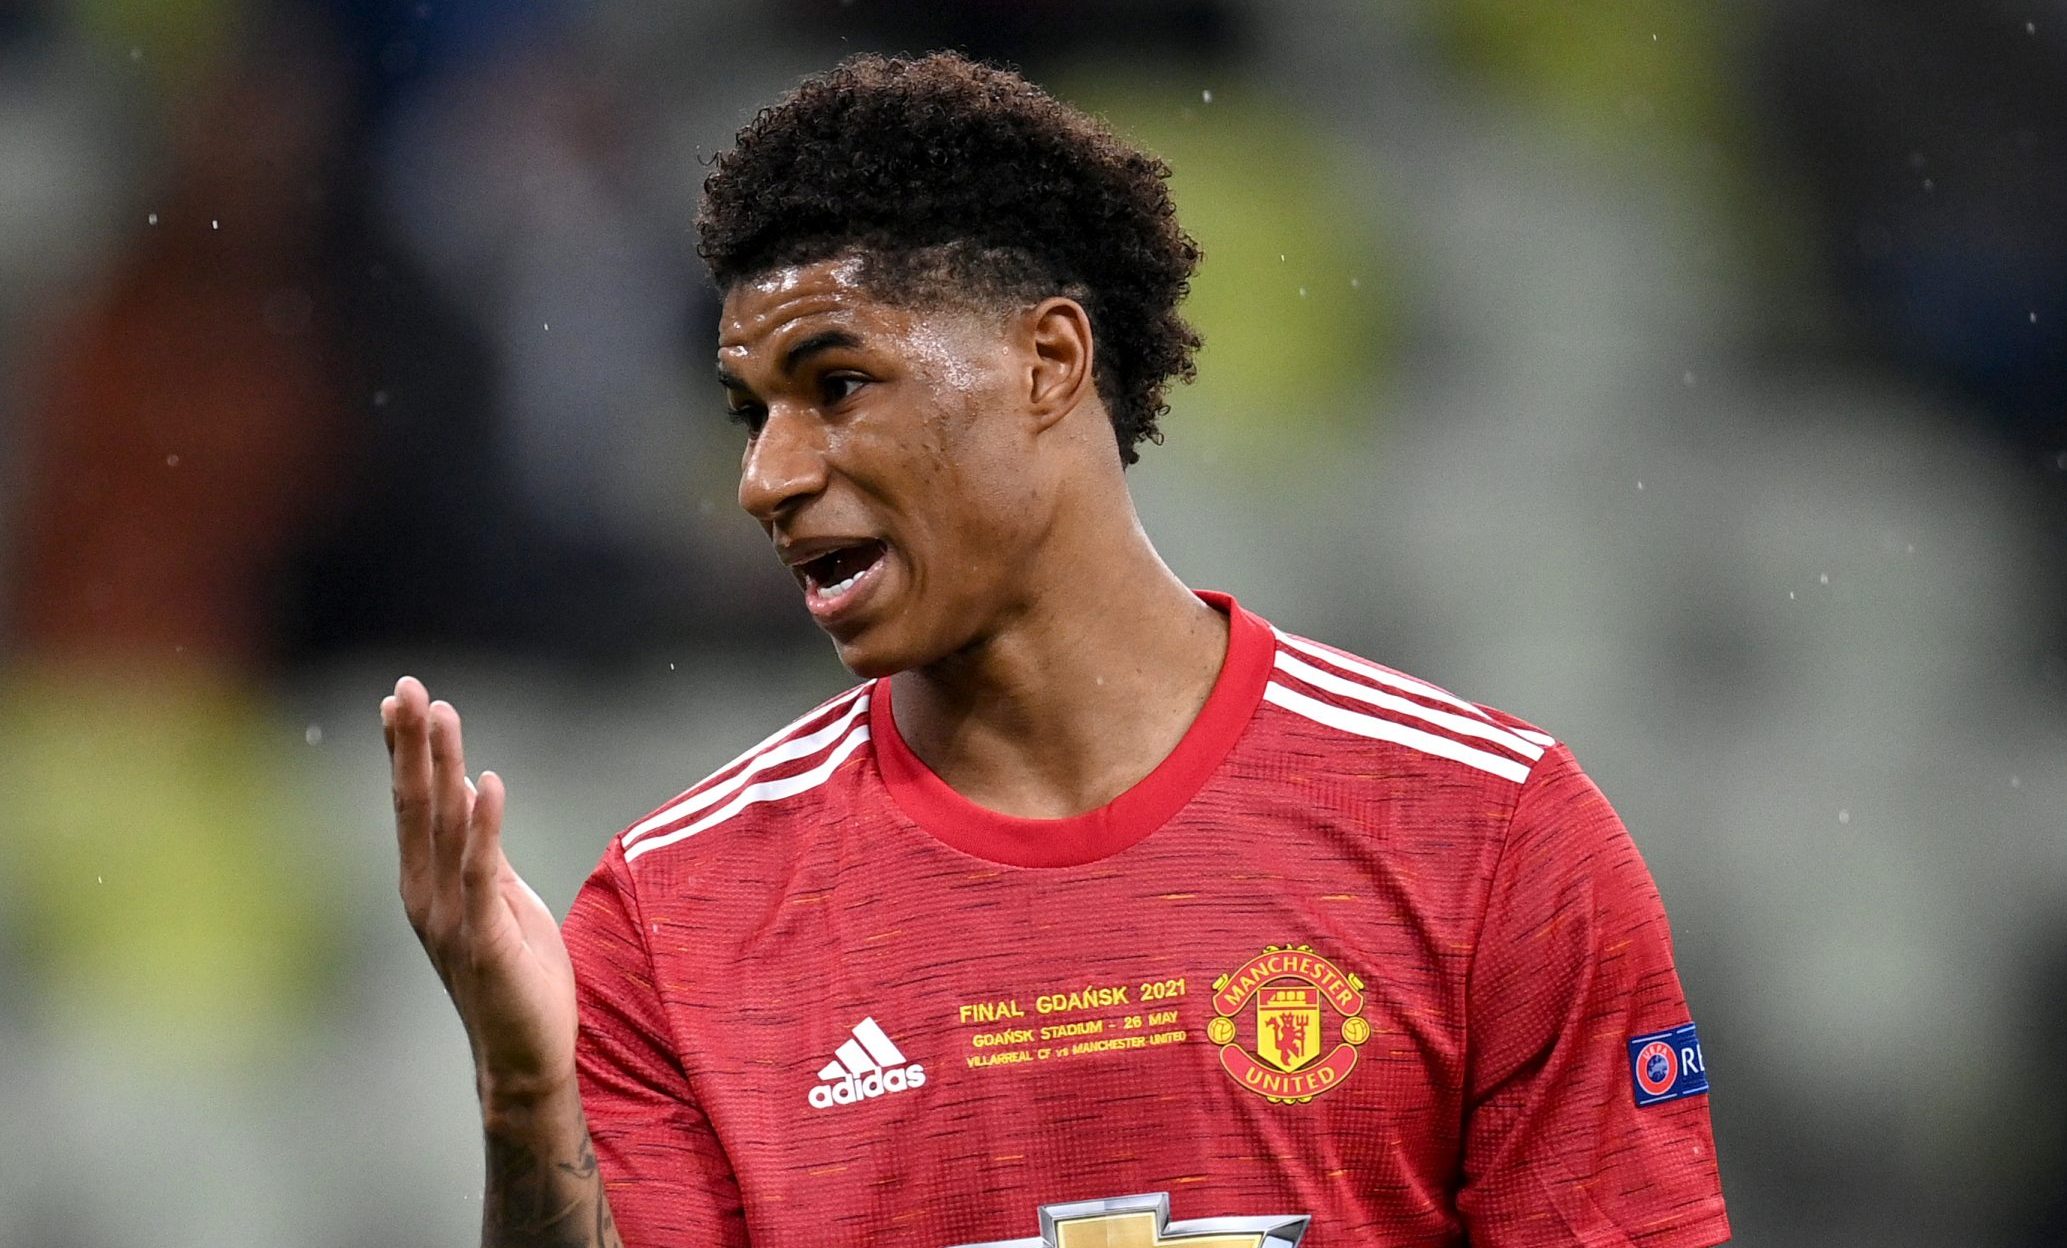 Rashford reveals torrent of racist abuse after Europa League loss